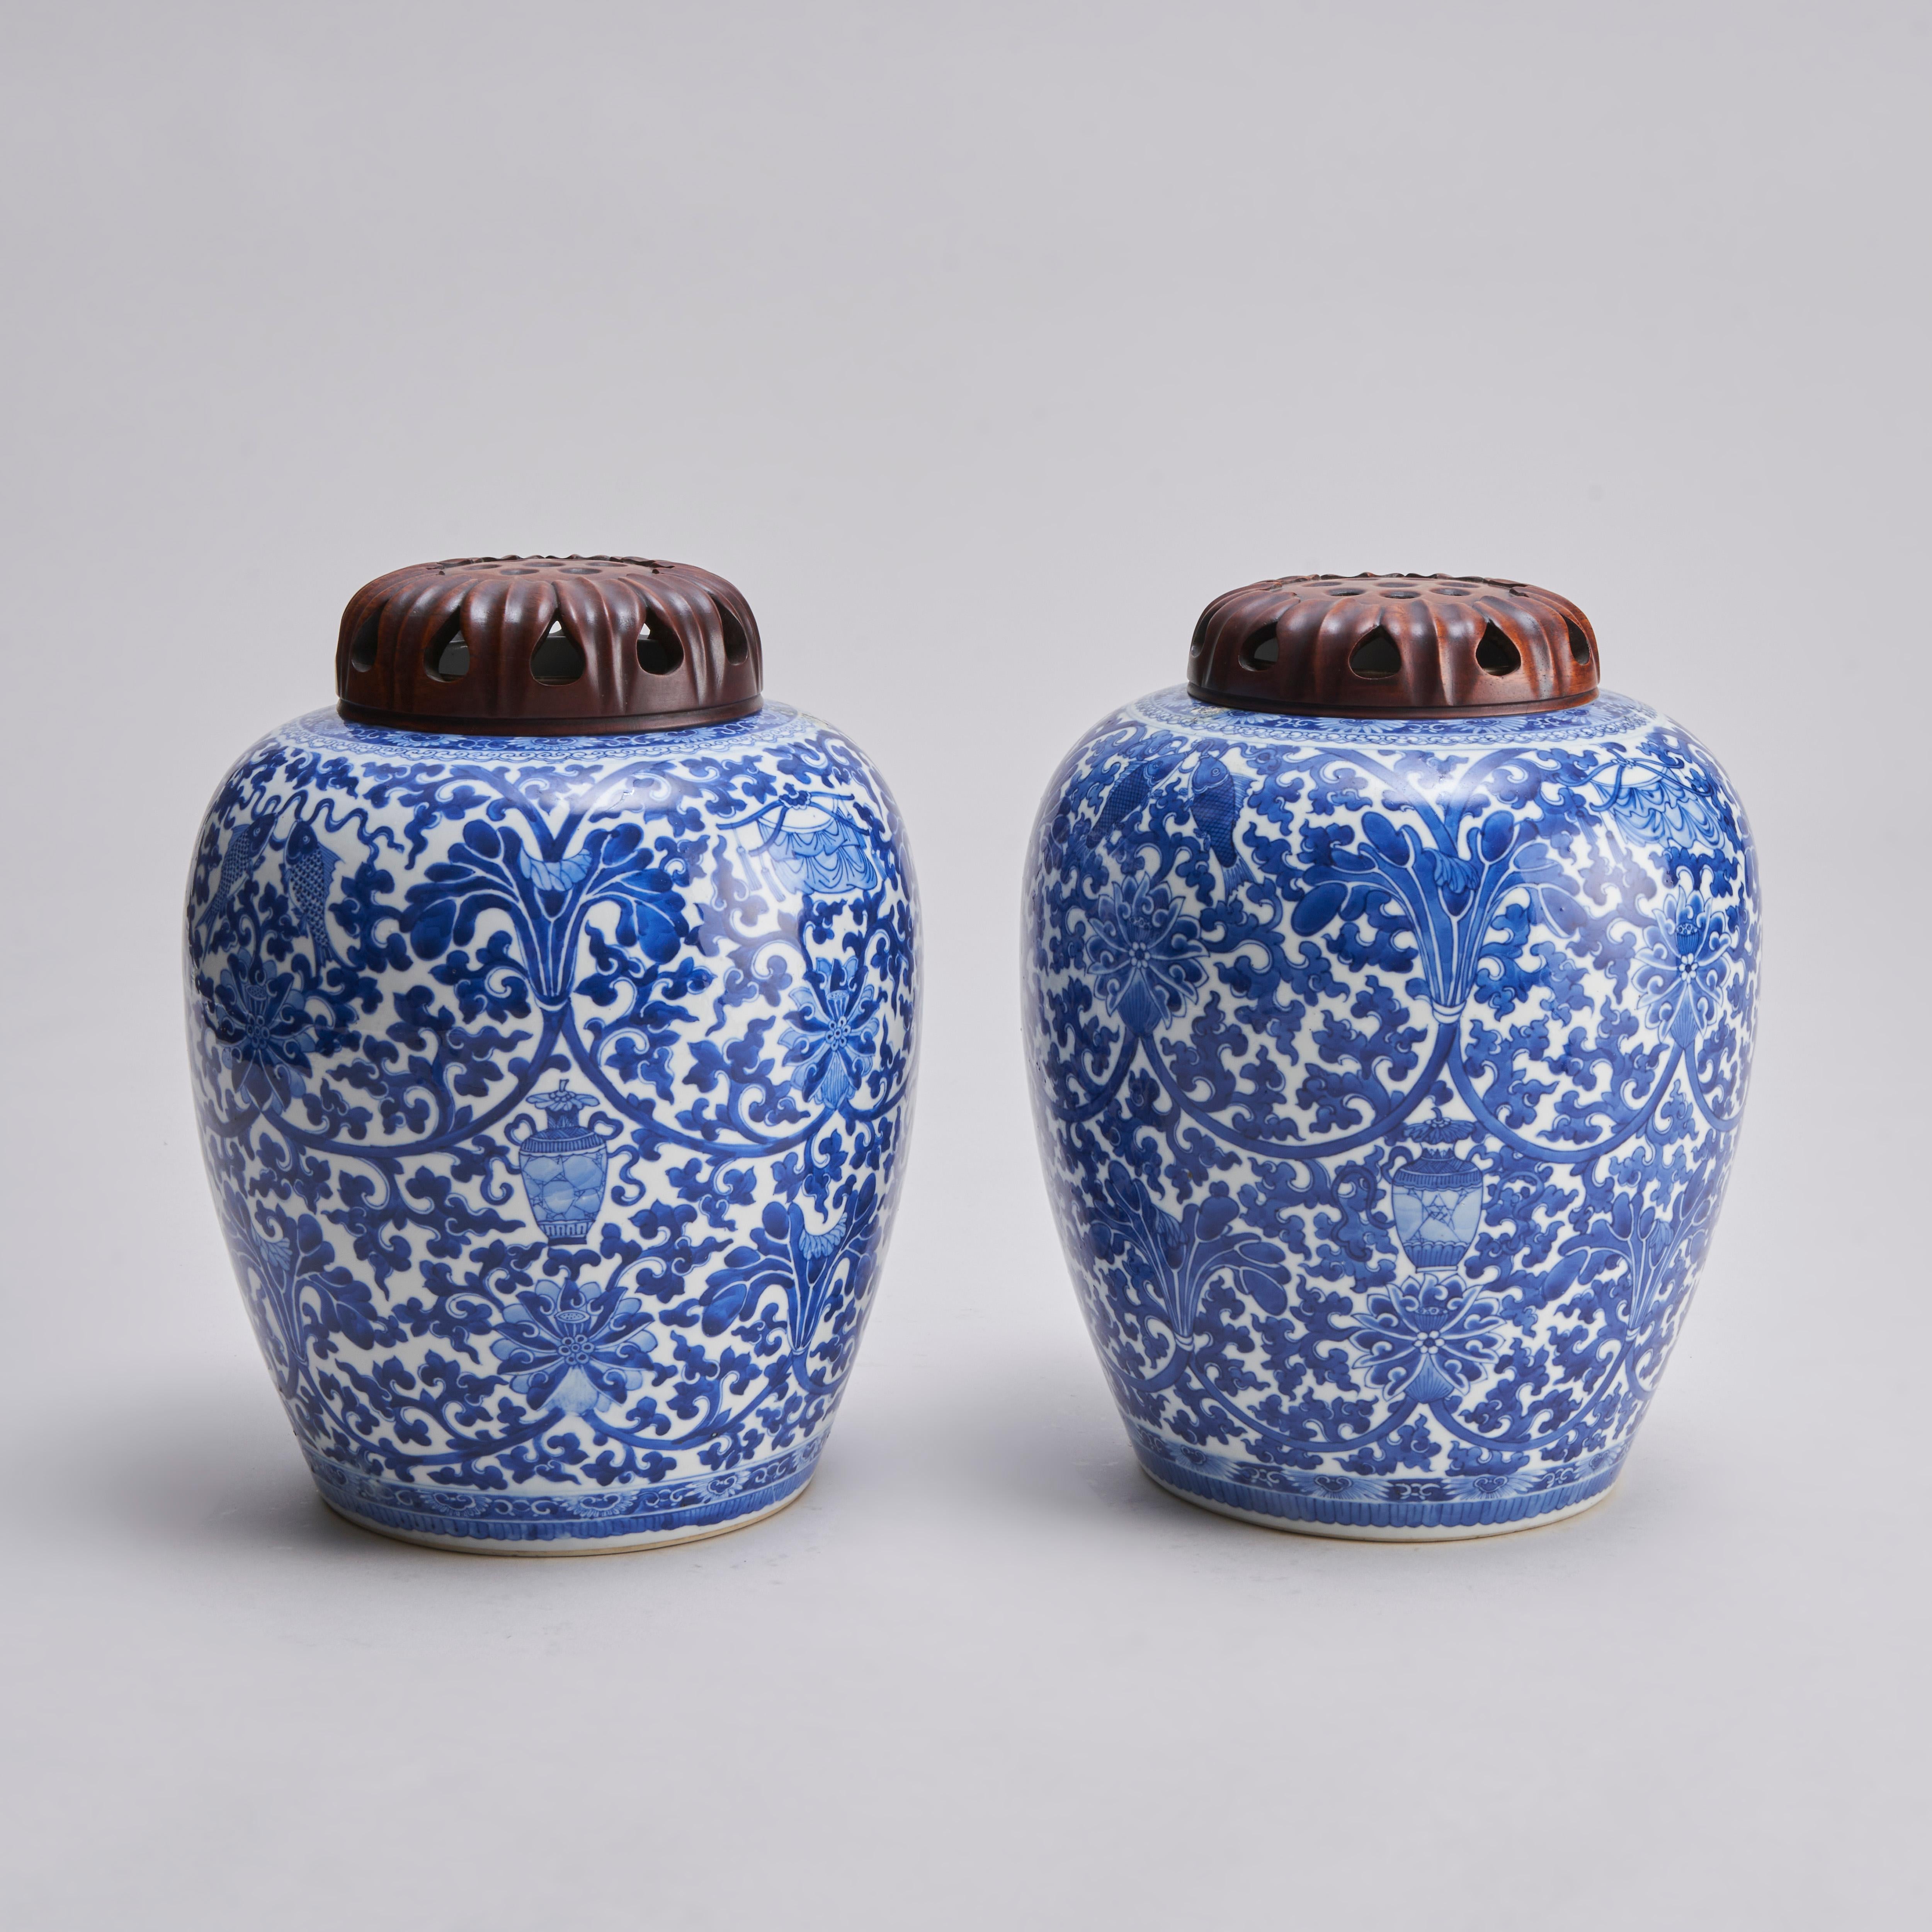 From our collection of antique Chinese porcelain, a pair of 19th century blue and white jars with wood covers.

The jars are decorated with lotus blossoms and foliate, among the foliage precious vases, fish and silks are entwined.

Contact us for